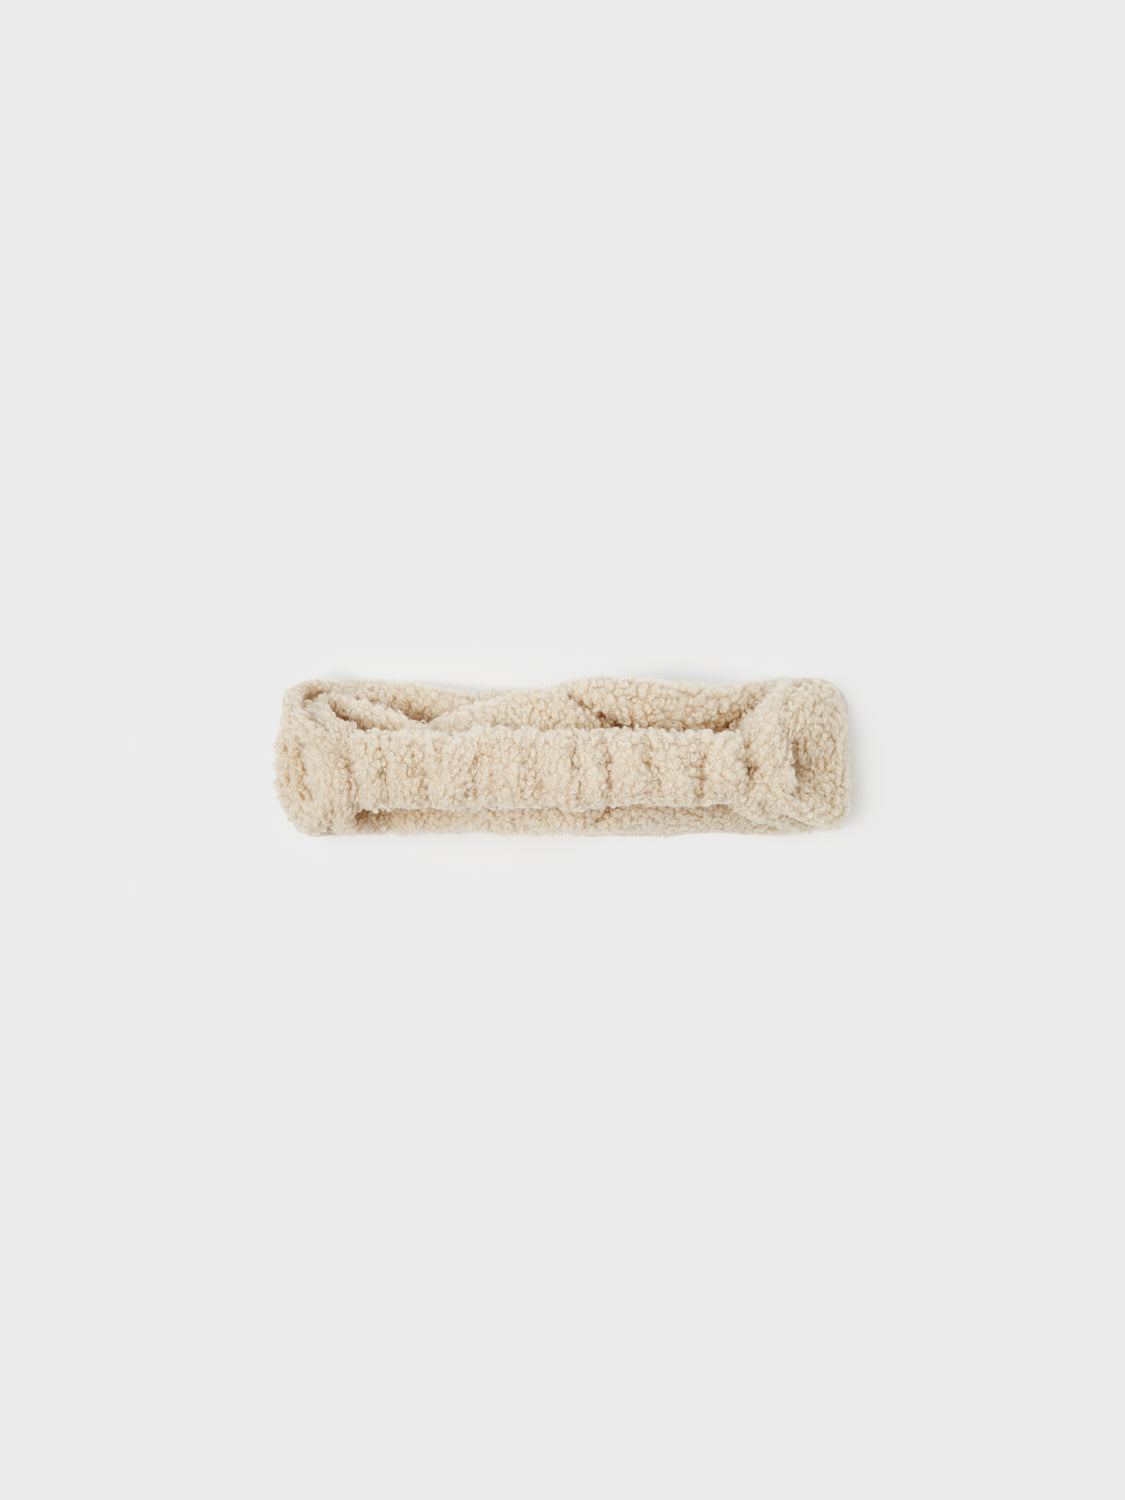 NKFACC-NILY Other Accessories - Oxford Tan